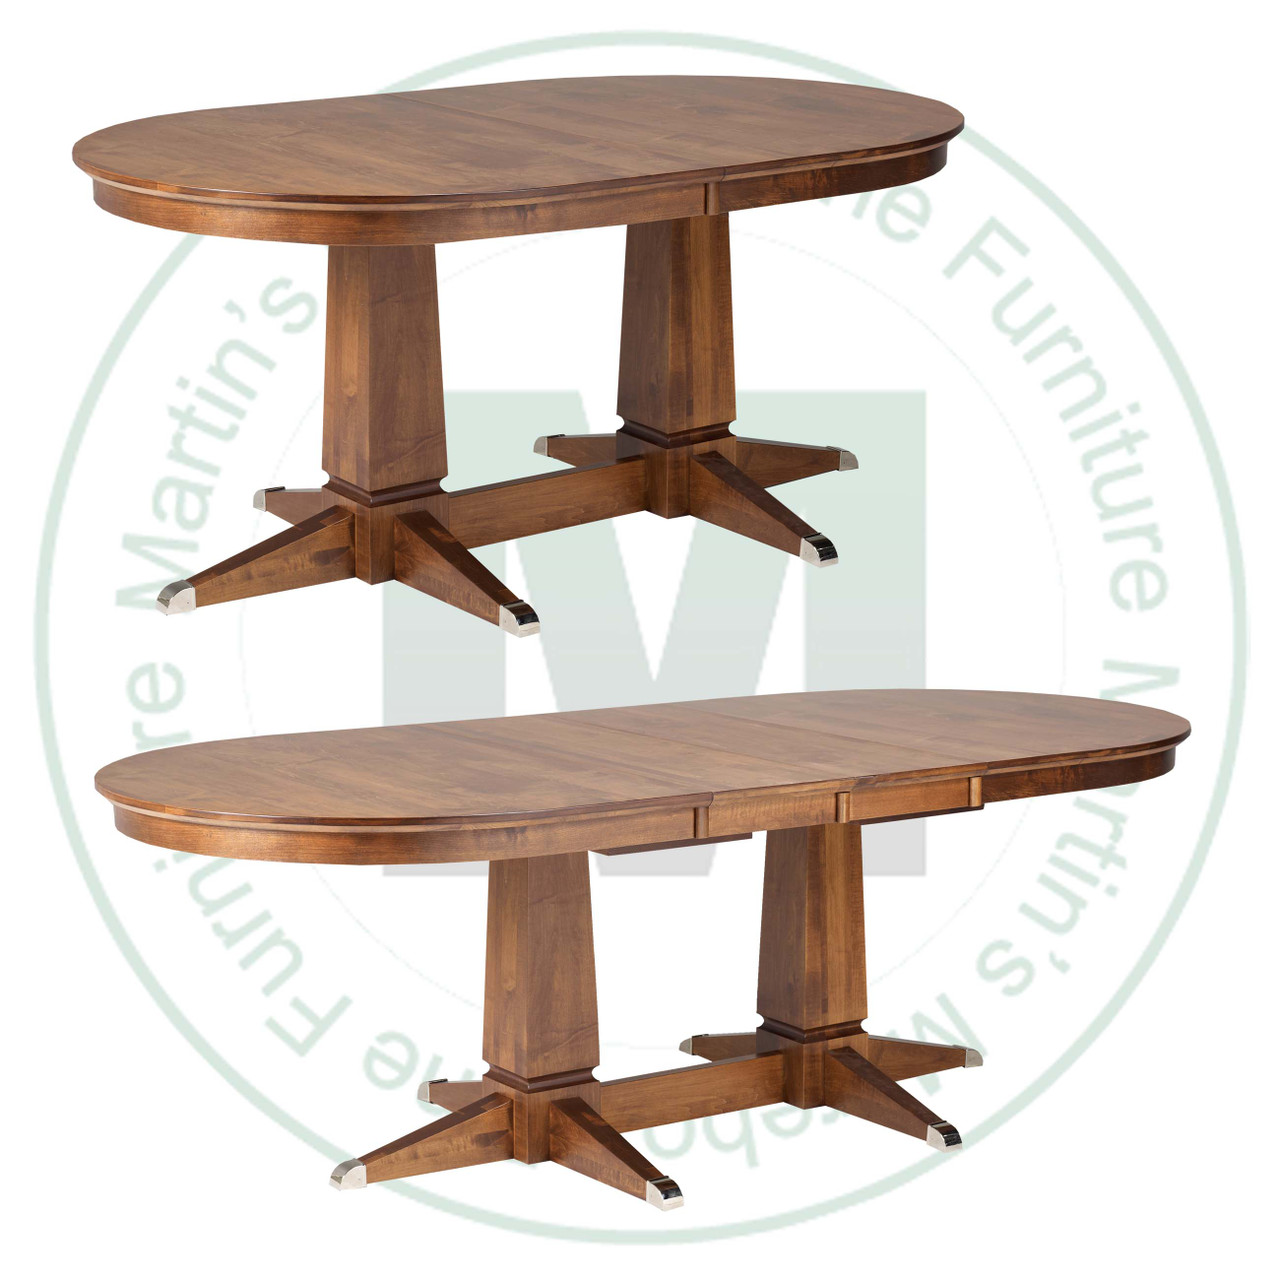 Maple Sweden Double Pedestal Table 48''D x 60''W x 30''H With 3 - 12'' Leaves